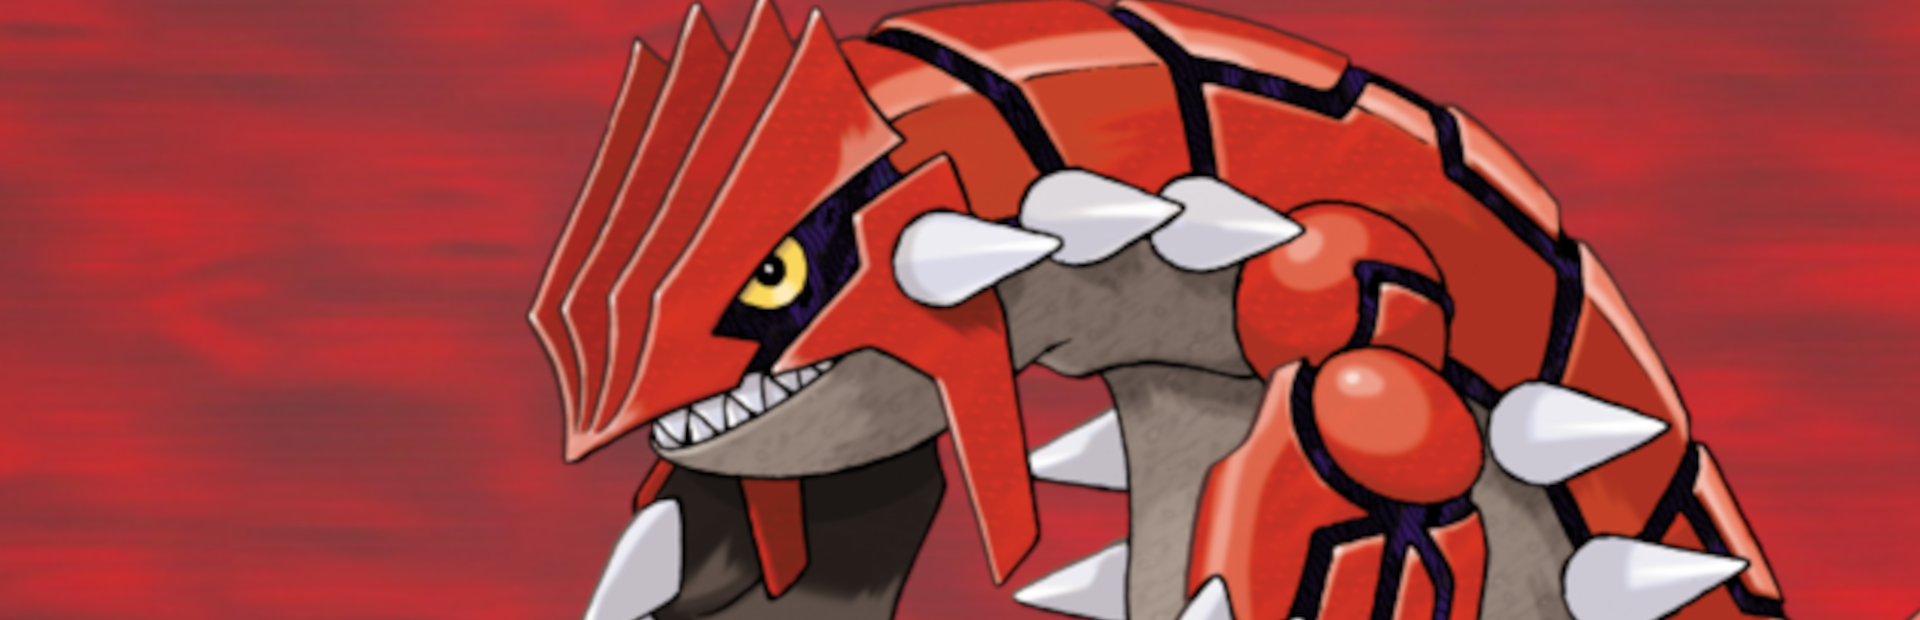 Icon for Pokémon Red Version by Lunecho